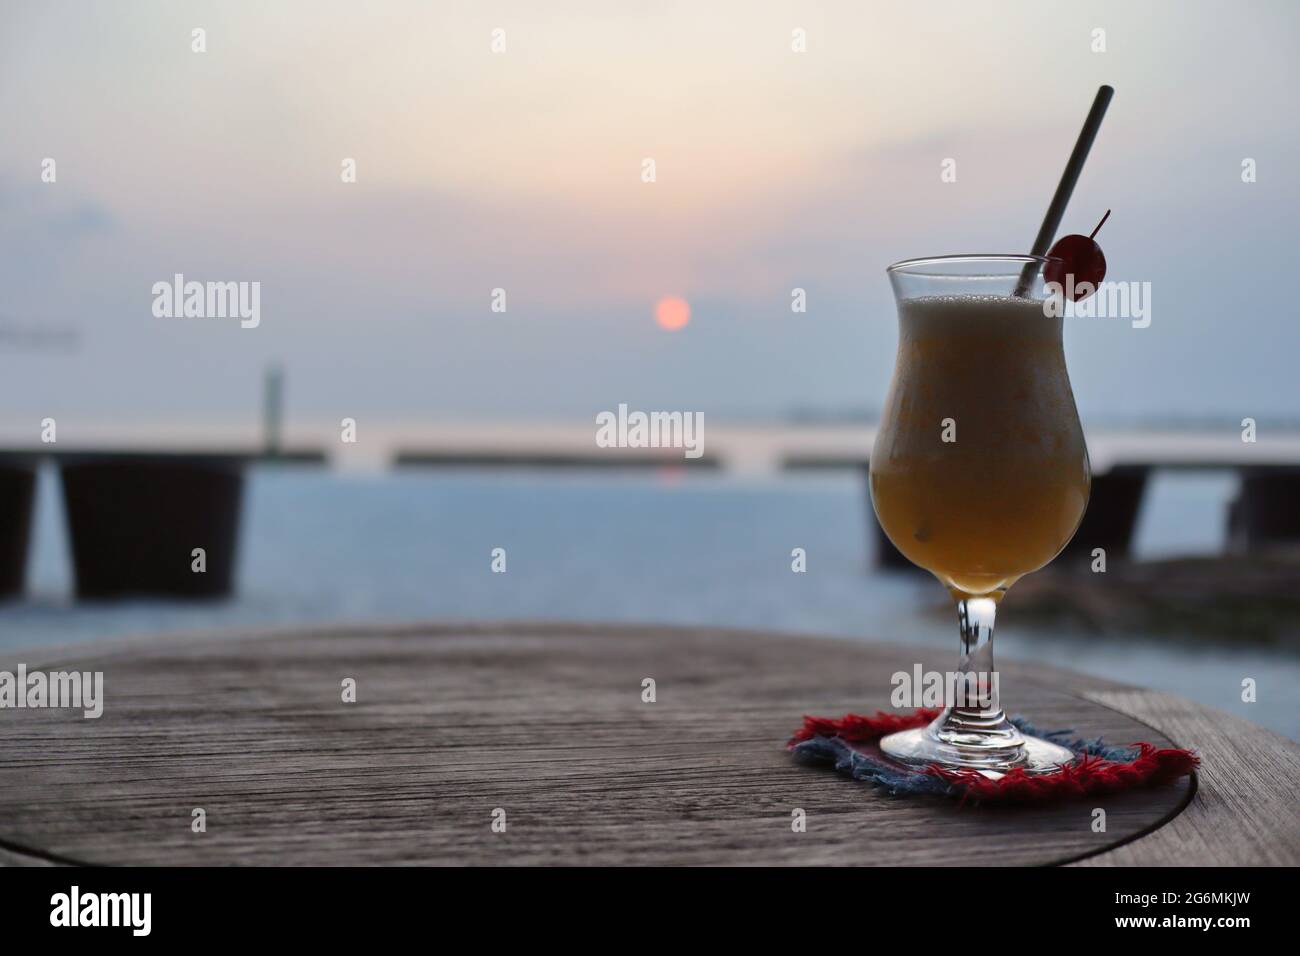 One Glass of Fruity Cocktail during Sunset in Maldives. Iced Beverage on Table in Maldivian Resort. Stock Photo